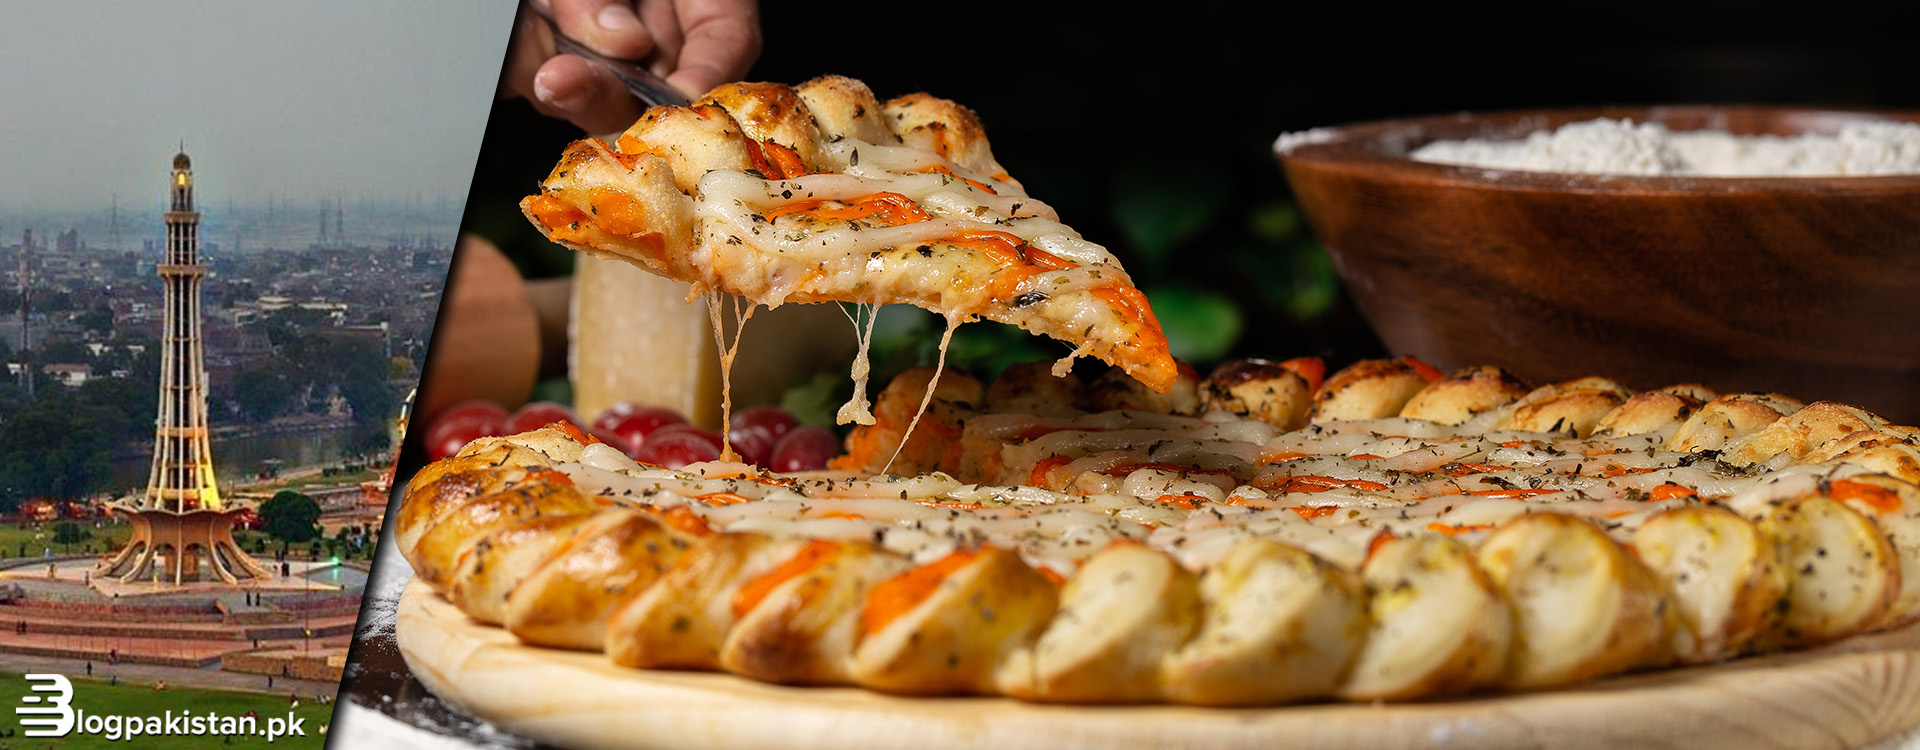 8 Best Places to Visit for Pizza in Lahore: Menu & Prices